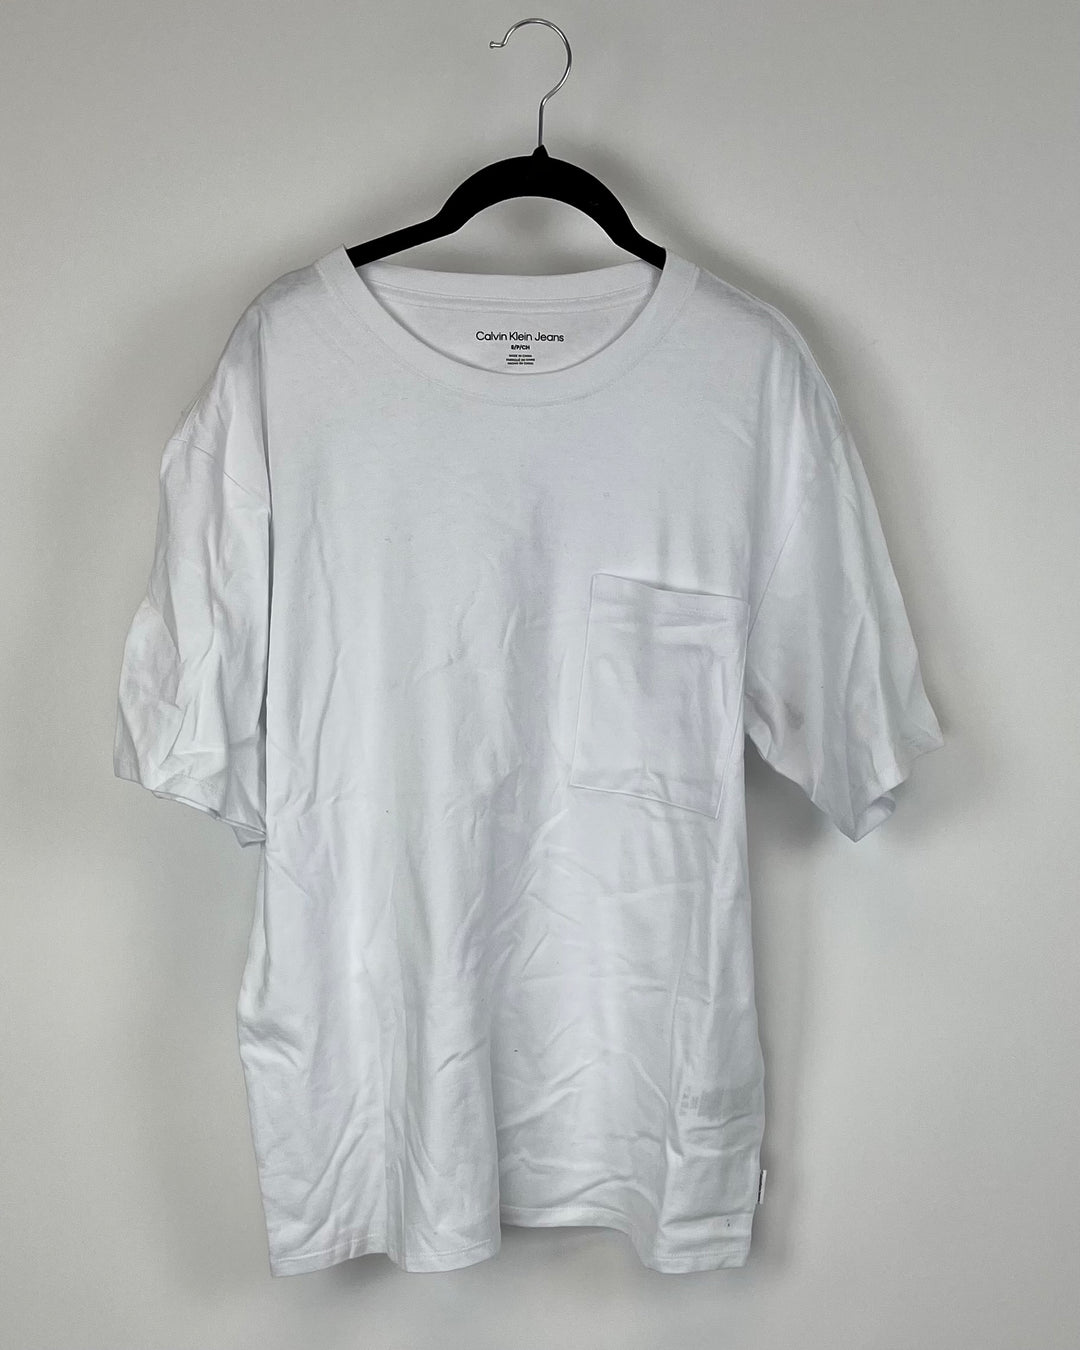 Short Sleeve White T-Shirt with Pocket - Small